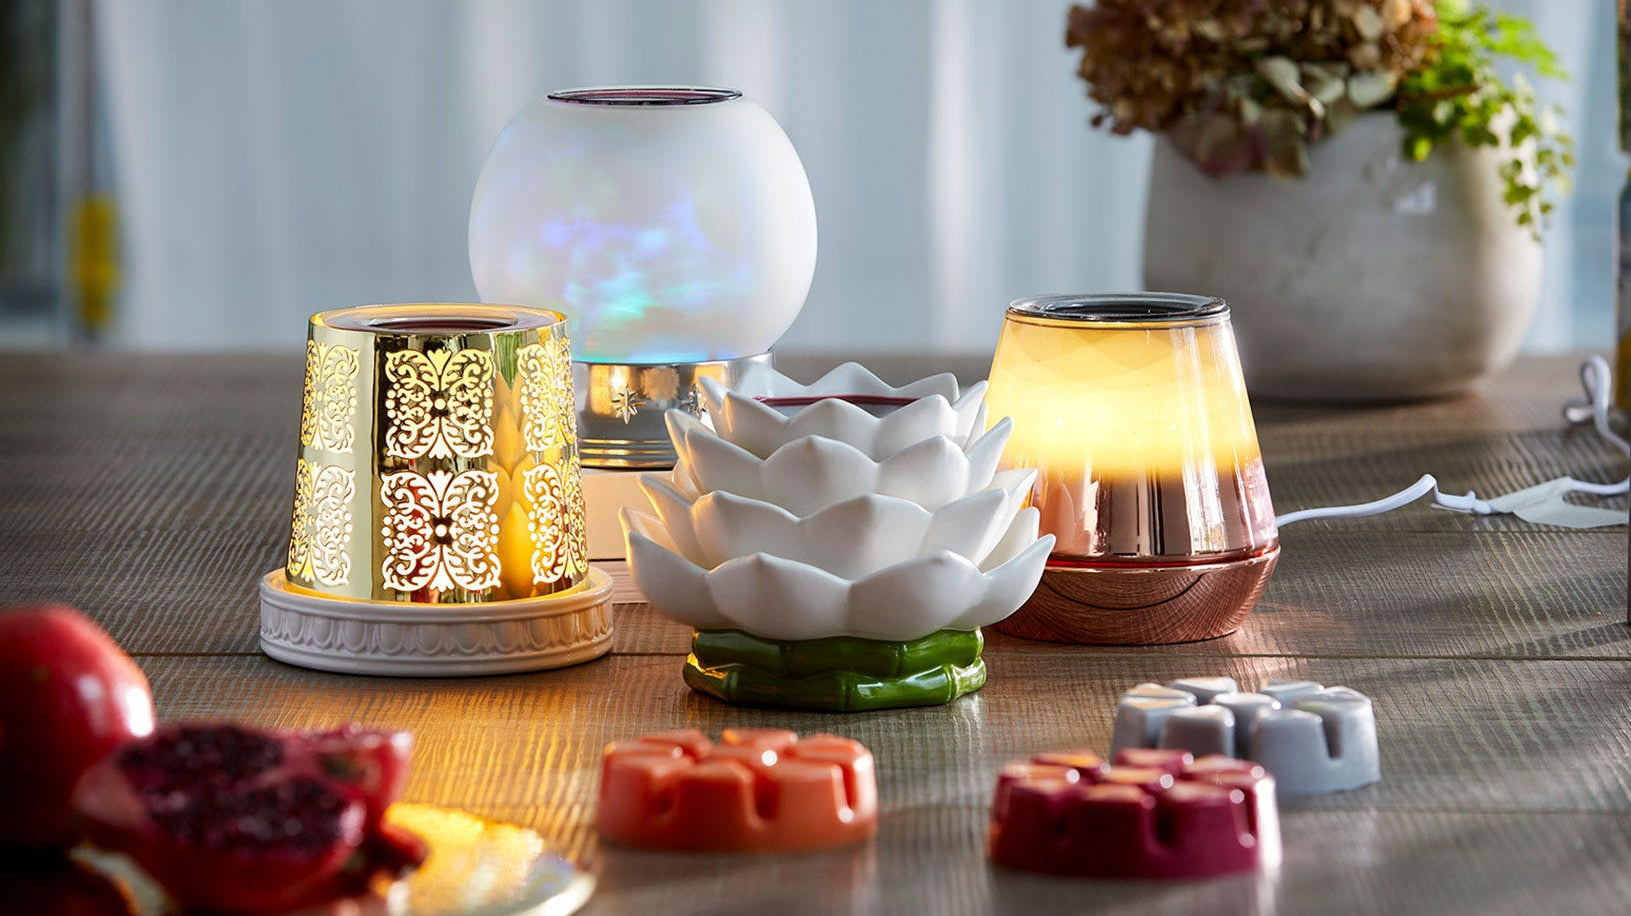 A variety of ScentGlow Warmers on a table